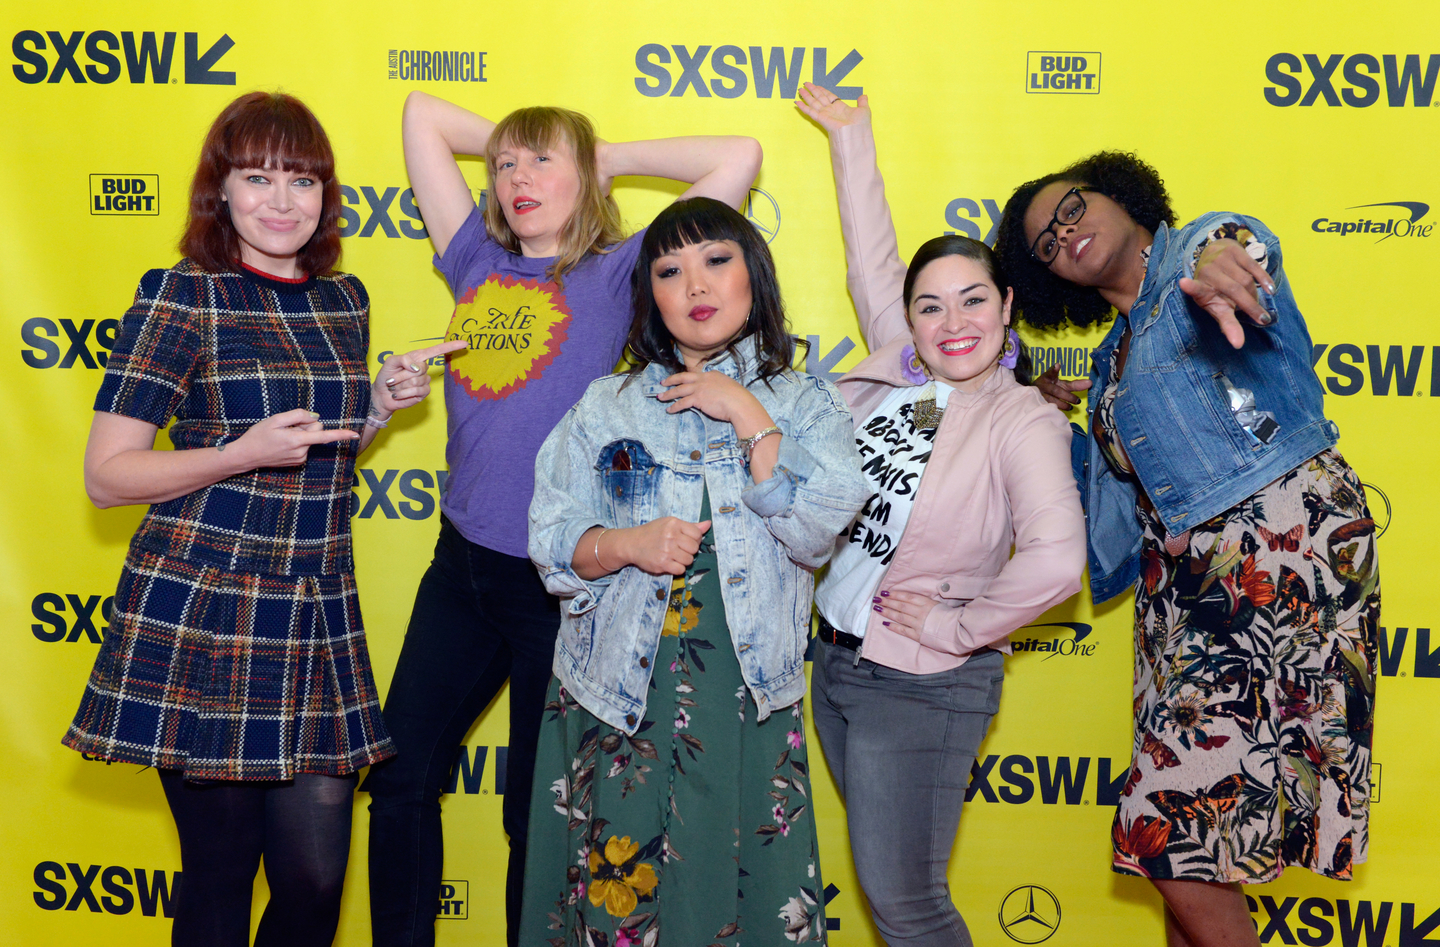 (L-R) Alicia Malone, Amy Nicholson, Jen Yamato, Monica Castillo and Jacqueline Coley before “The Female Voices of Film Twitter” panel. Photo by Nicola Gell/Getty Images for SXSW